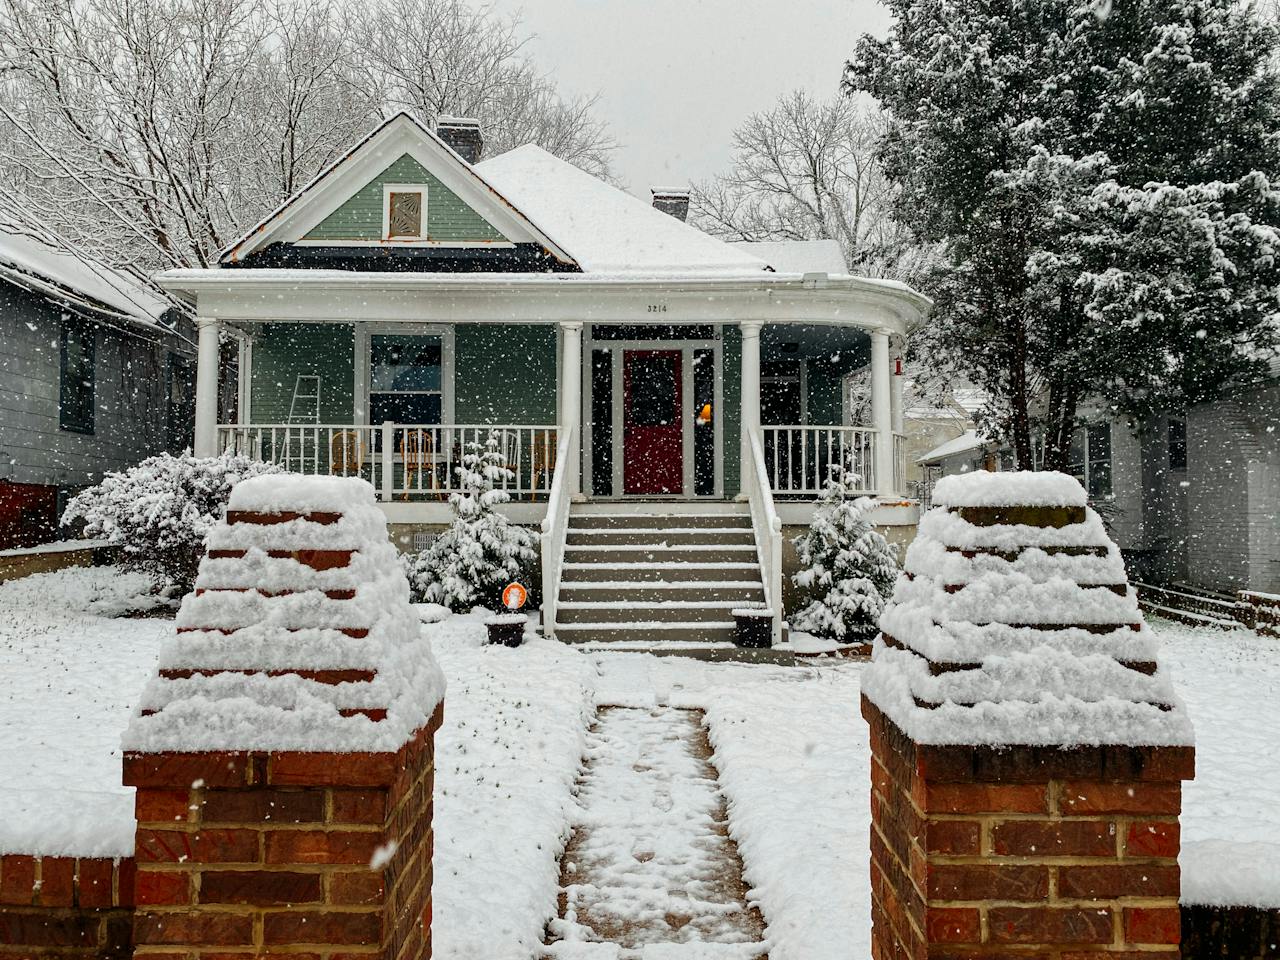 Snow falls in town on a charming, green home.